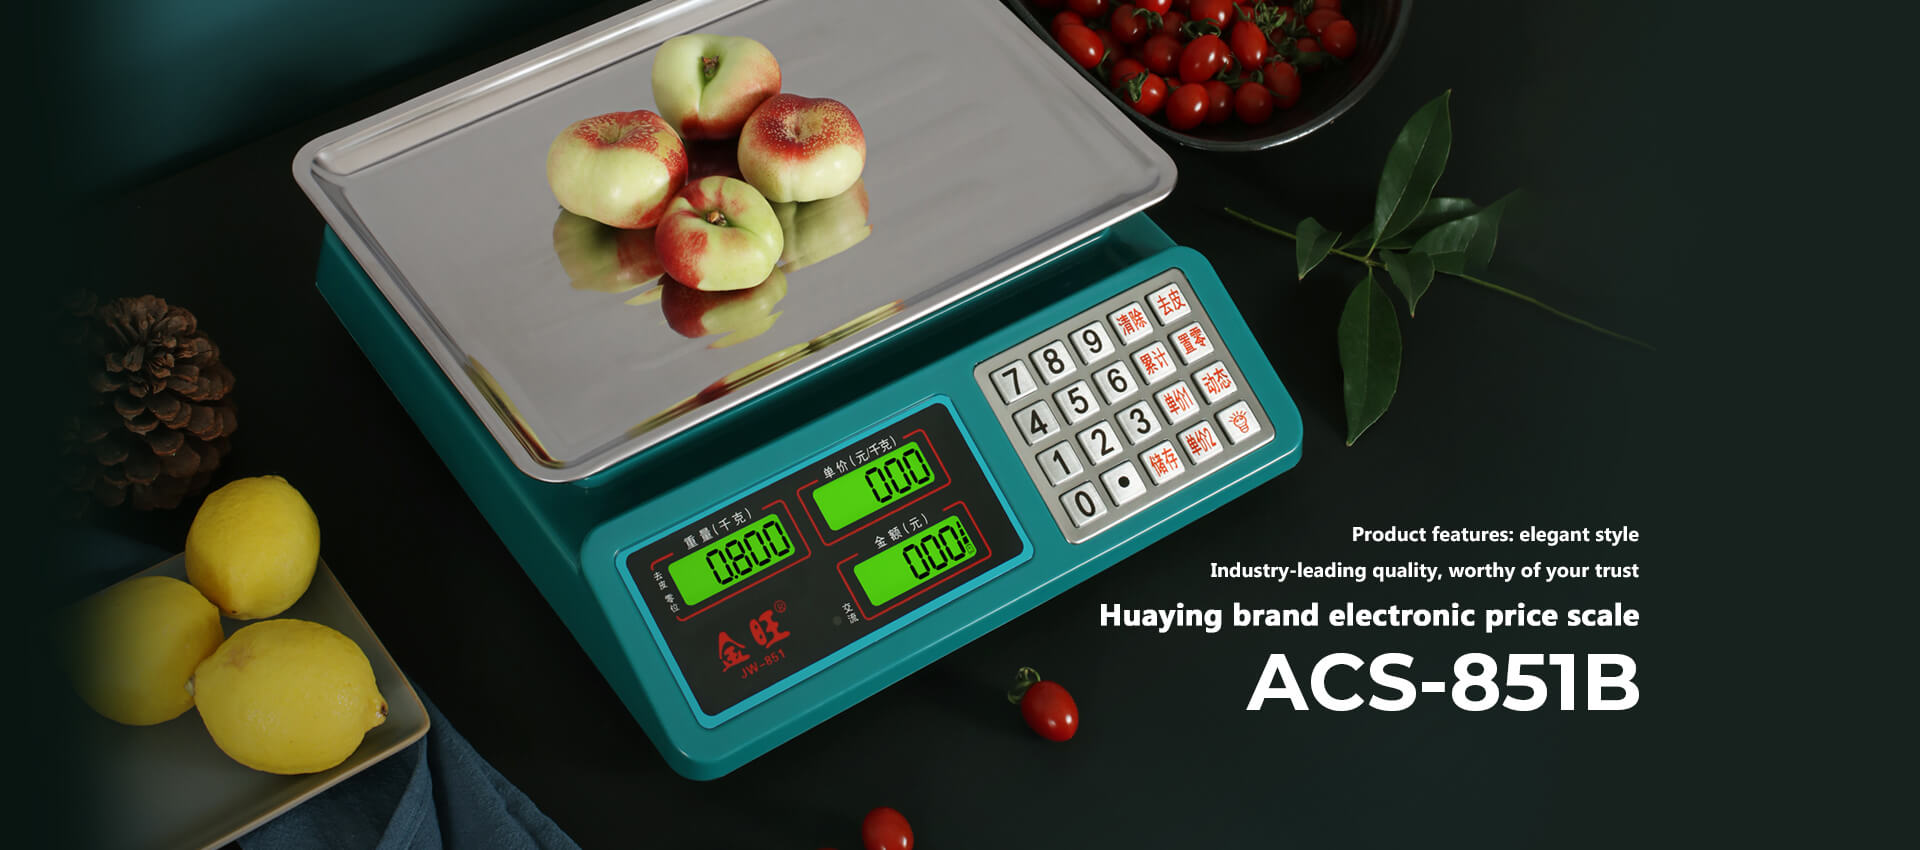 Electronic pricing scale ACS-851B